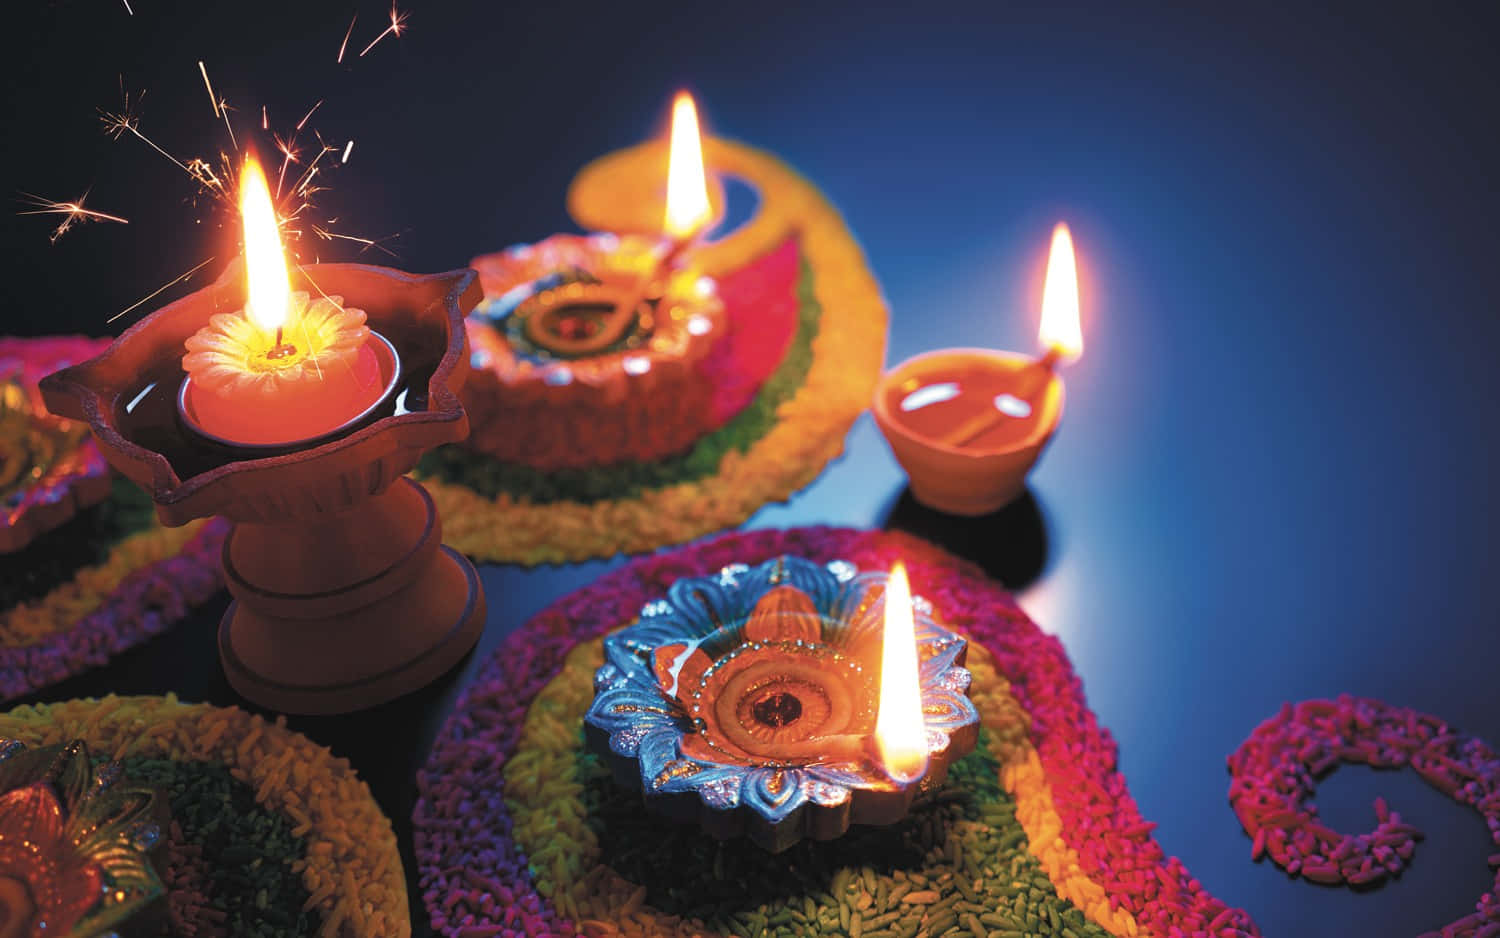 Brighten up the night with Diwali candles